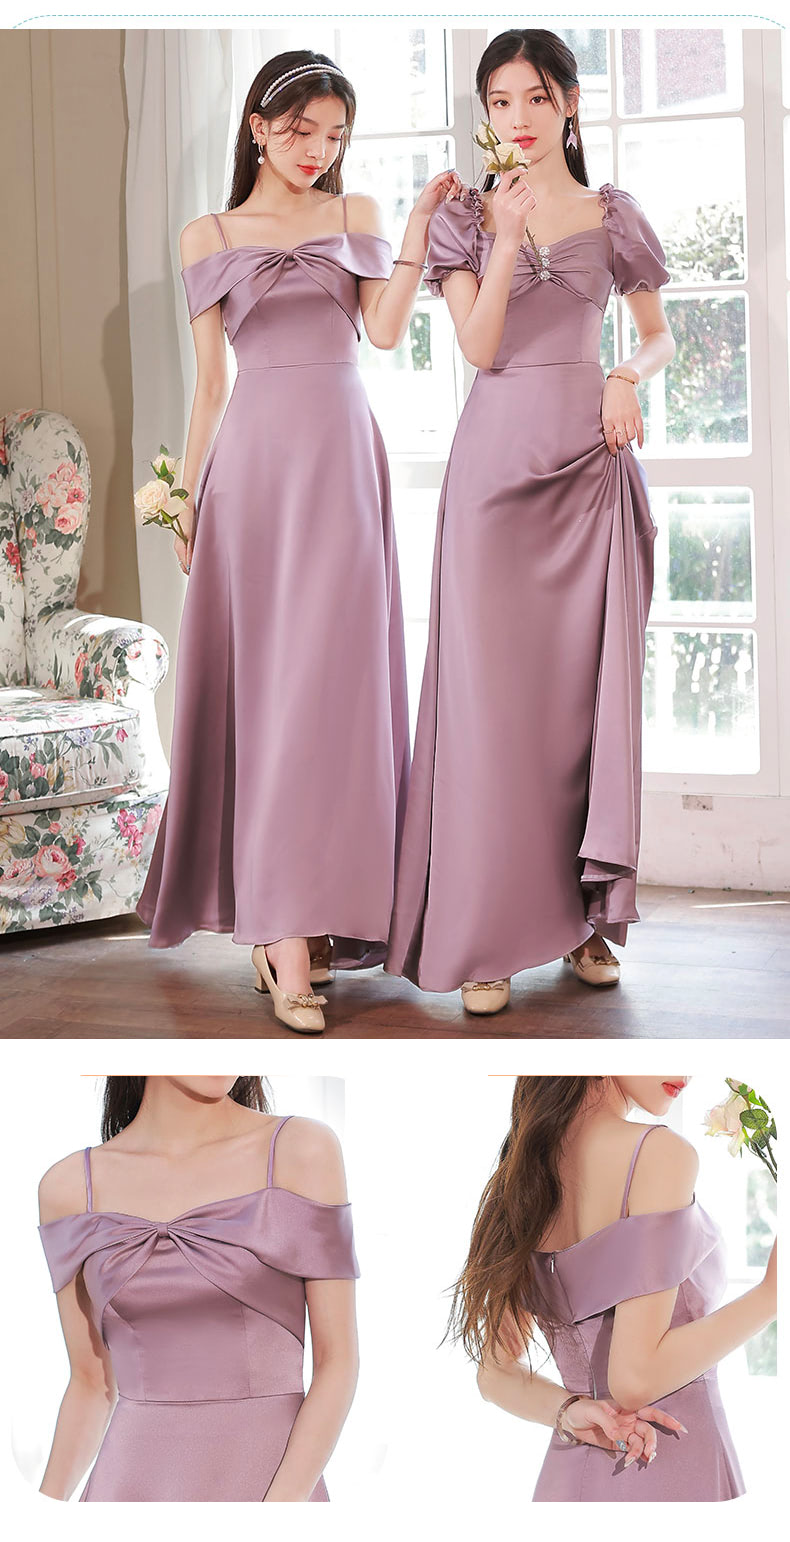 Sweet-Sexy-Purple-Satin-Bridesmaid-Long-Dress-Party-Casual-Ball-Gown15.jpg